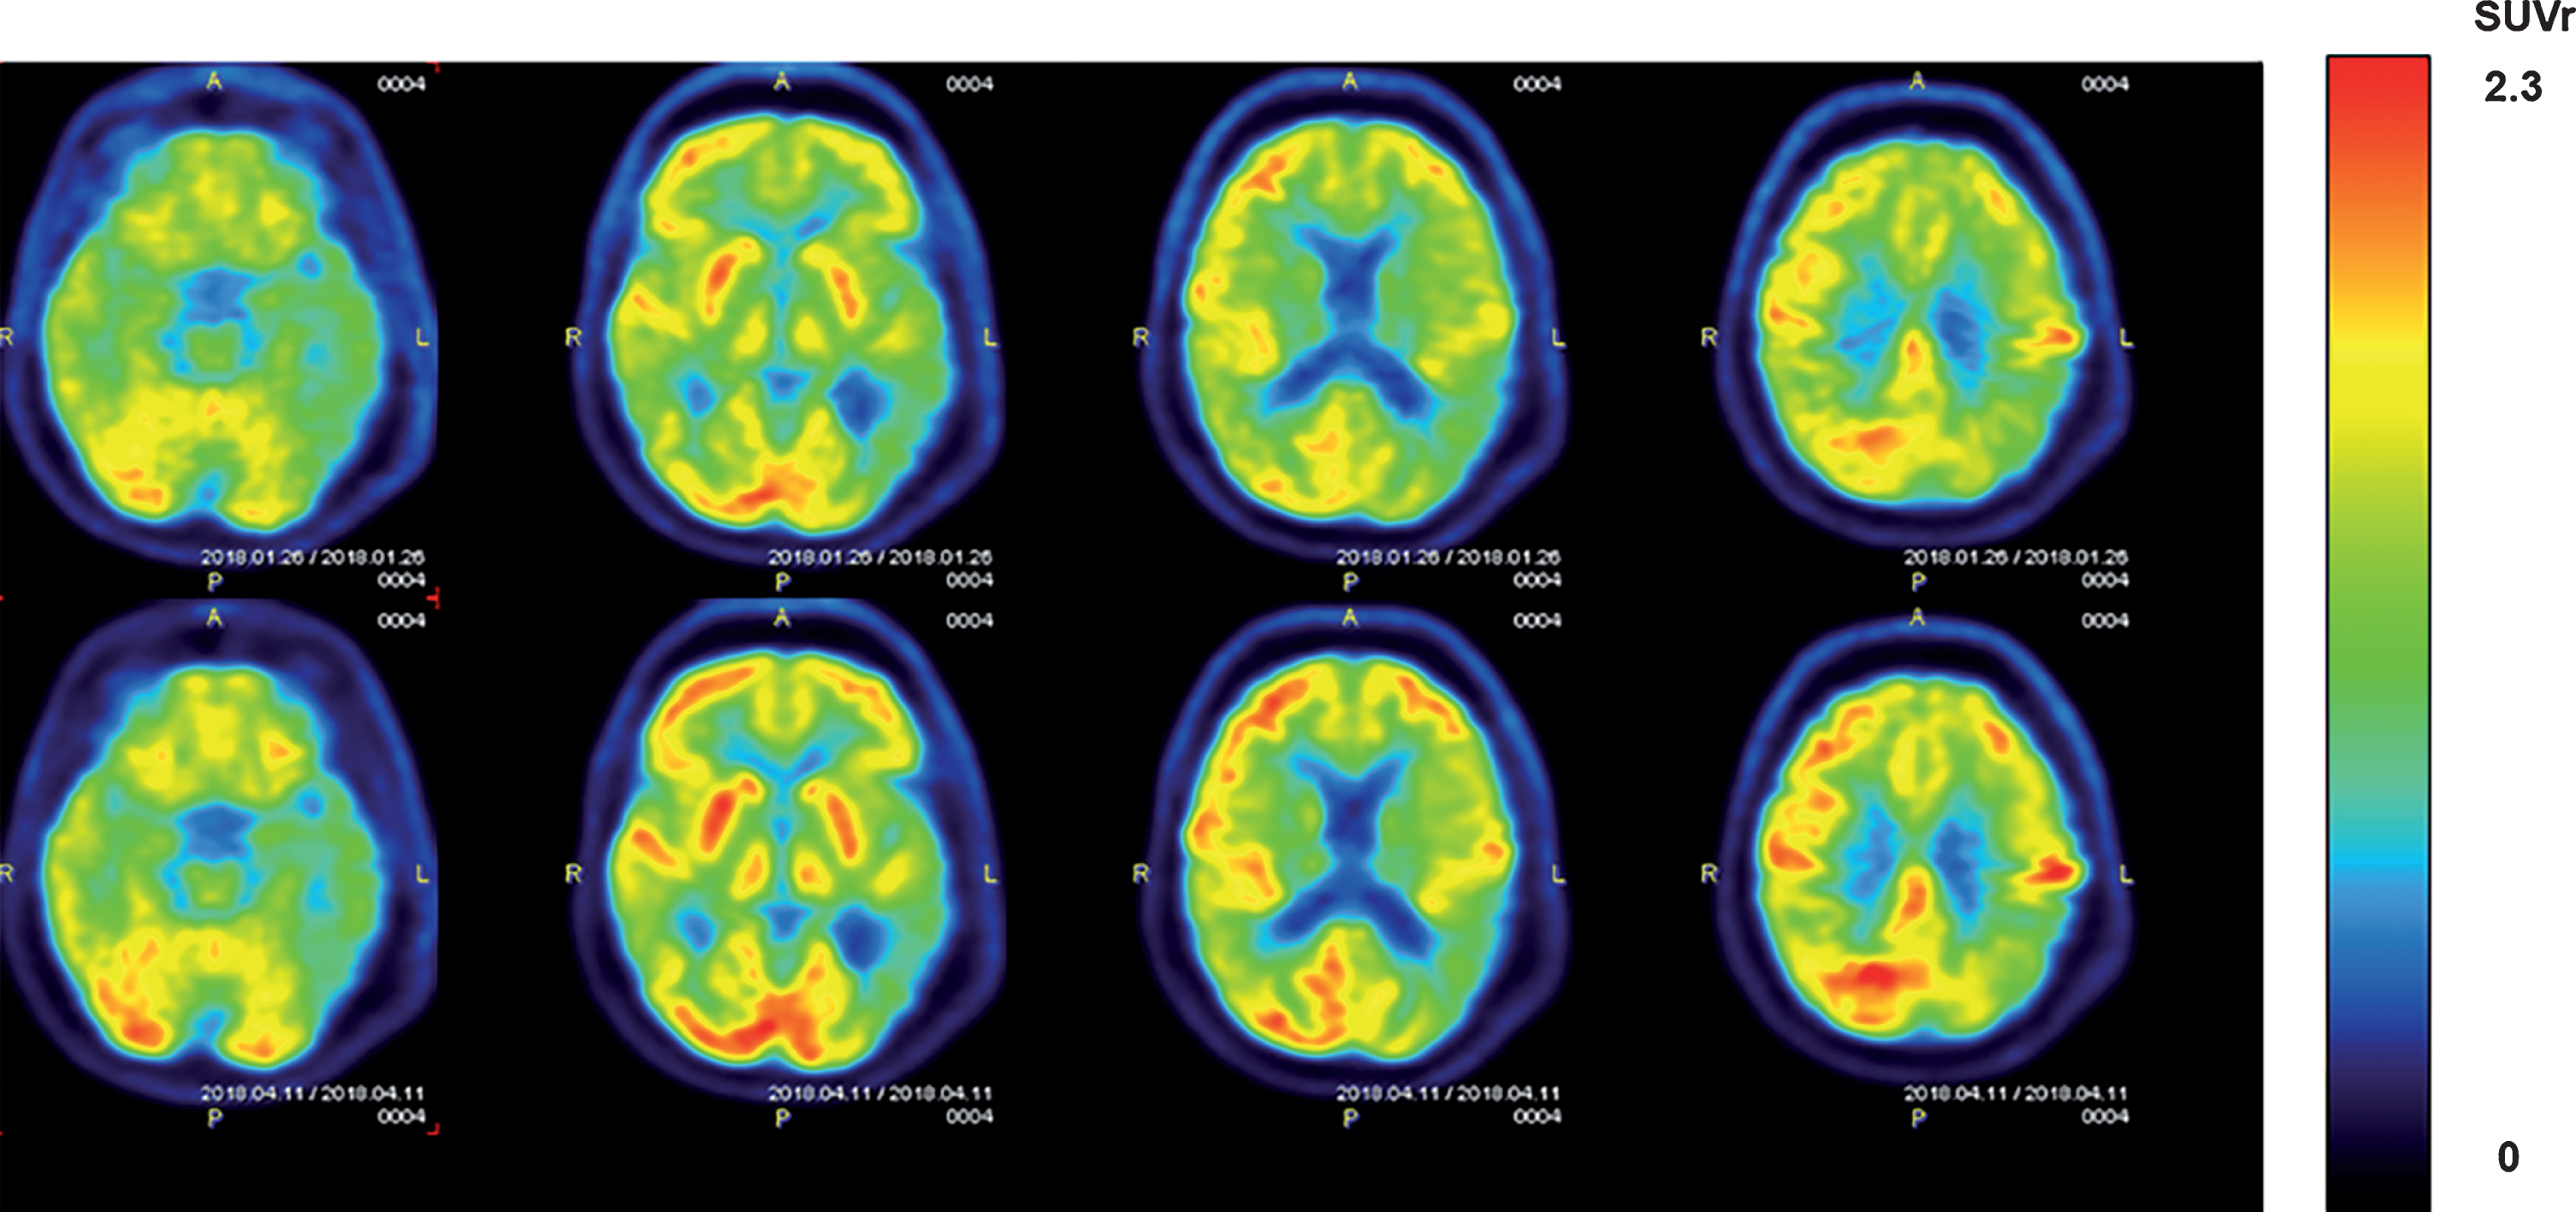 FDG-PET scans from an AD subject showing cerebral metabolic rate for glucose (CMGgl) in four horizontal levels. The upper scans were taken at baseline, with corresponding lower scans taken at the same level following 2 months of daily TEMT. Note higher FDG-PET intensity after TEMT throughout the forebrain (especially in the left hemisphere), as evidenced by more prevalent red/orange areas.